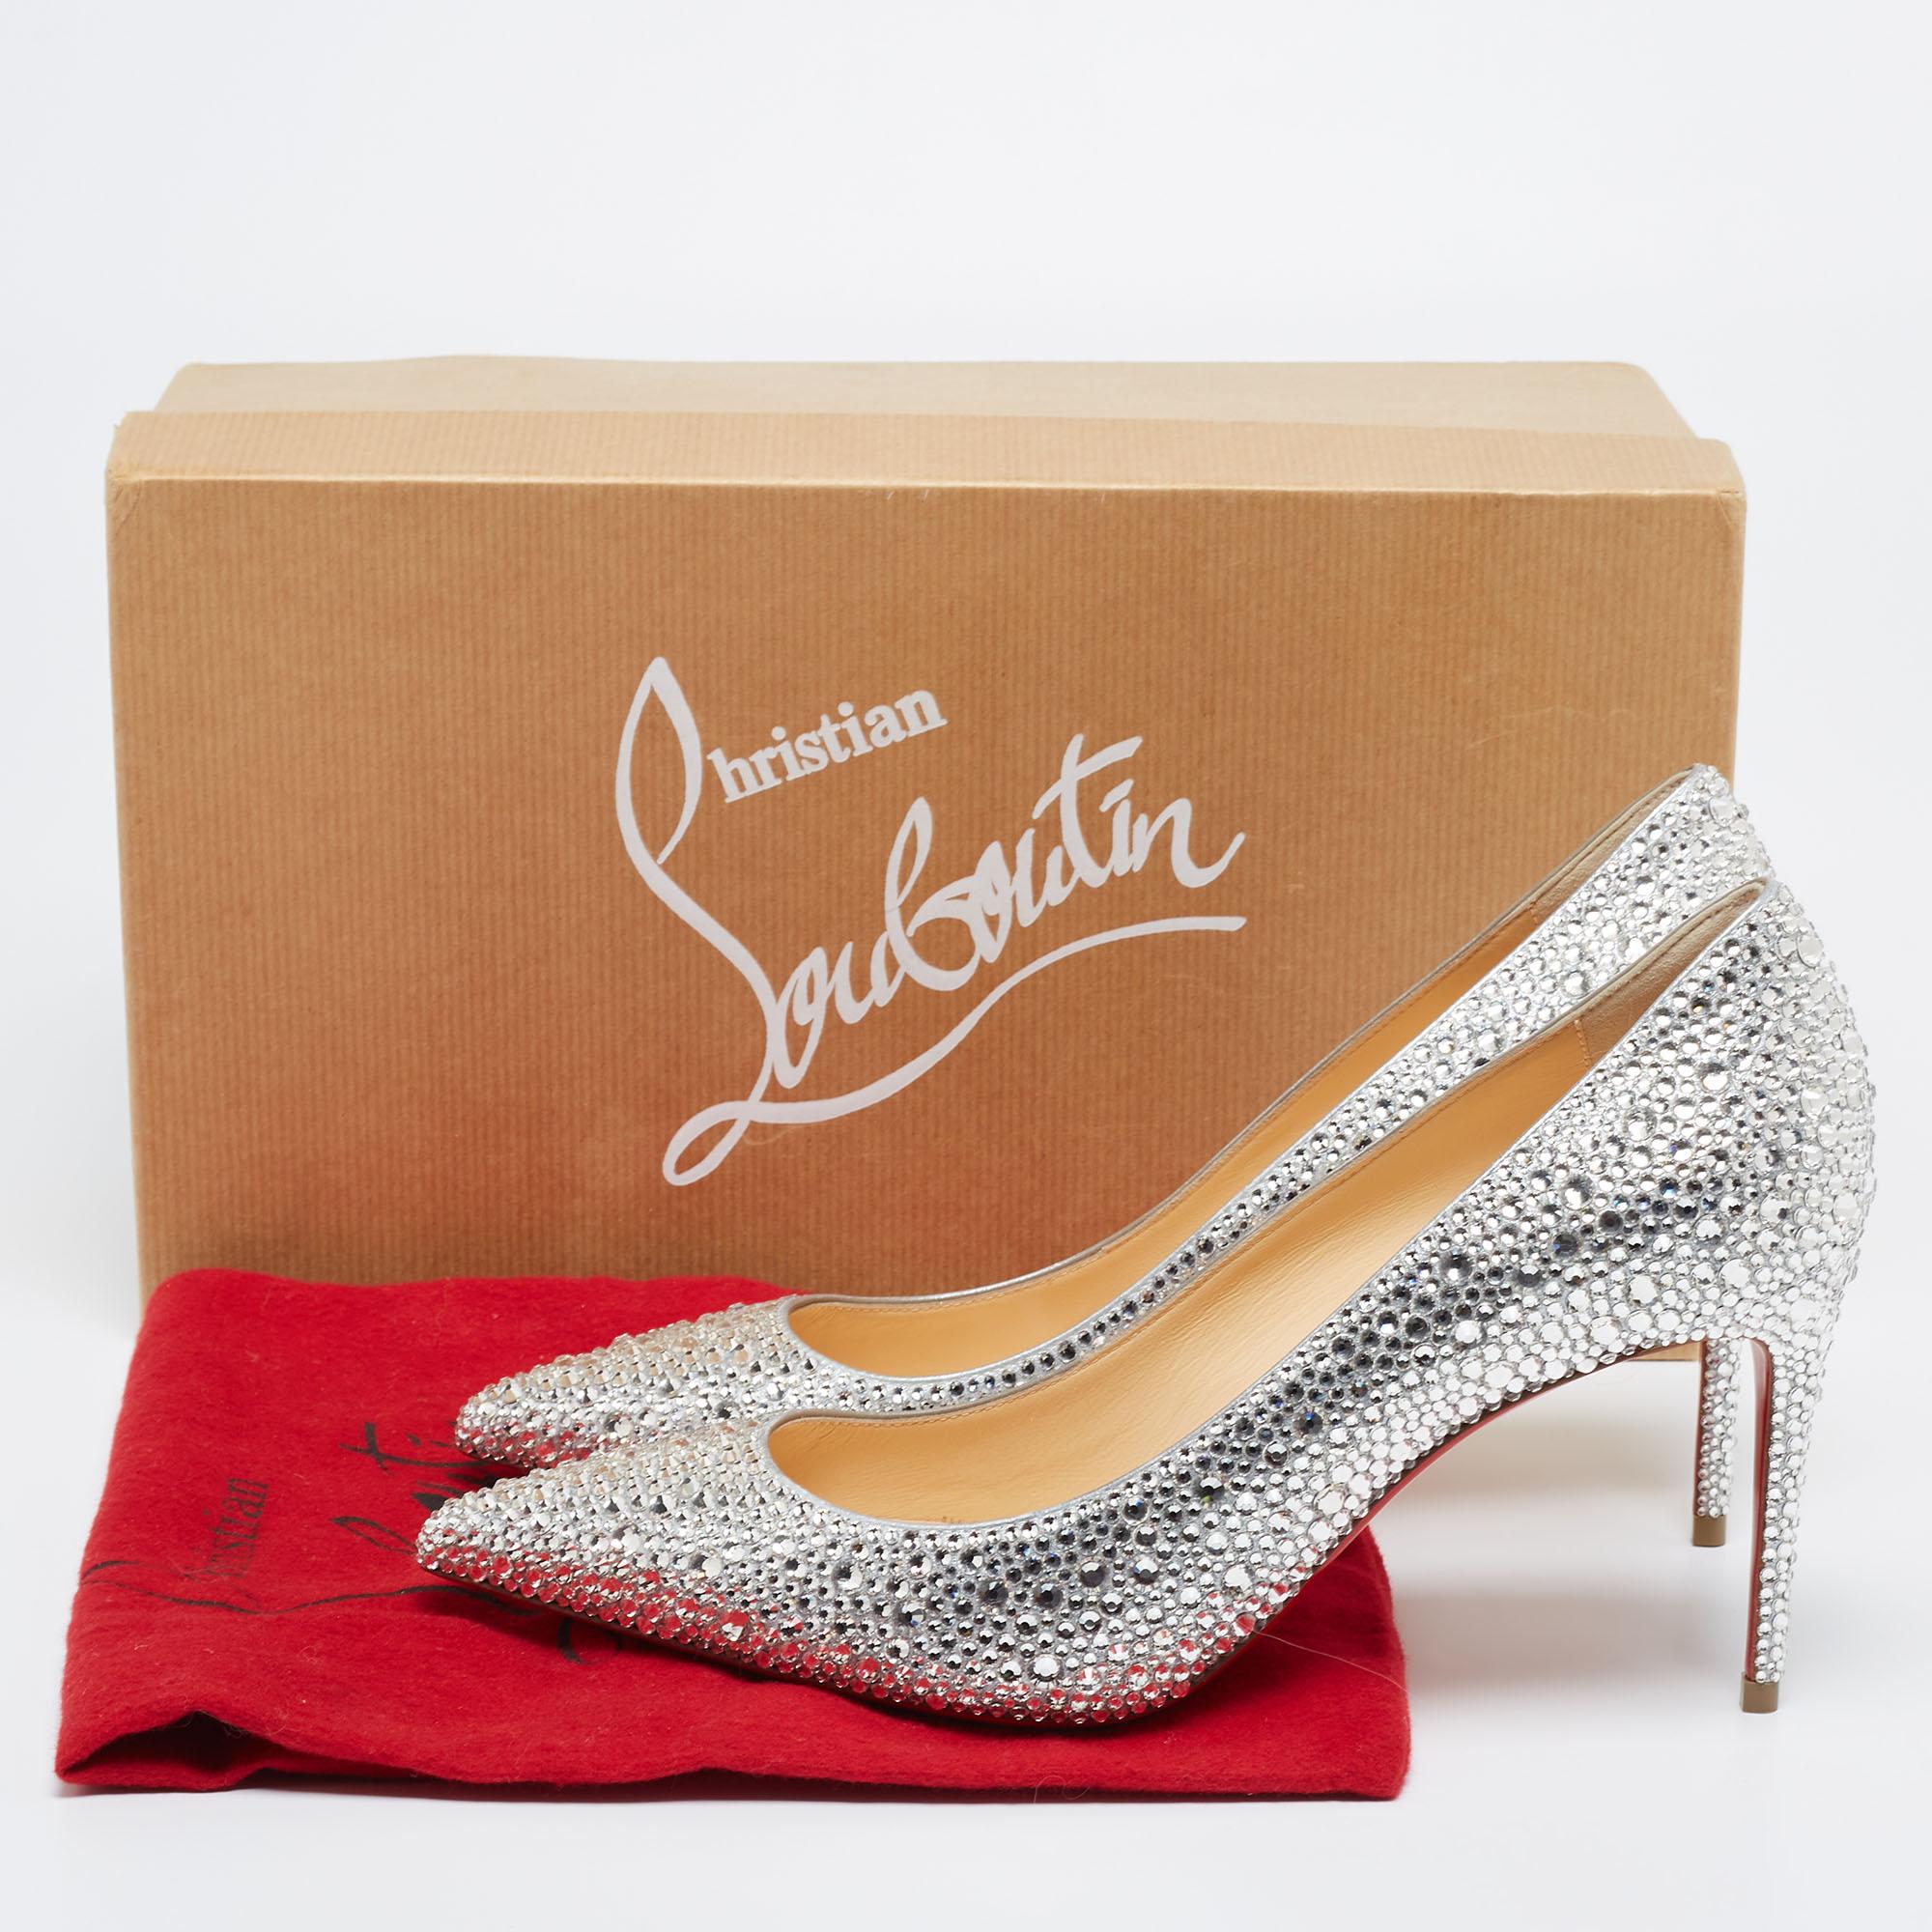 Christian Louboutin Silver Strass Leather Kate Pumps Size 38 2